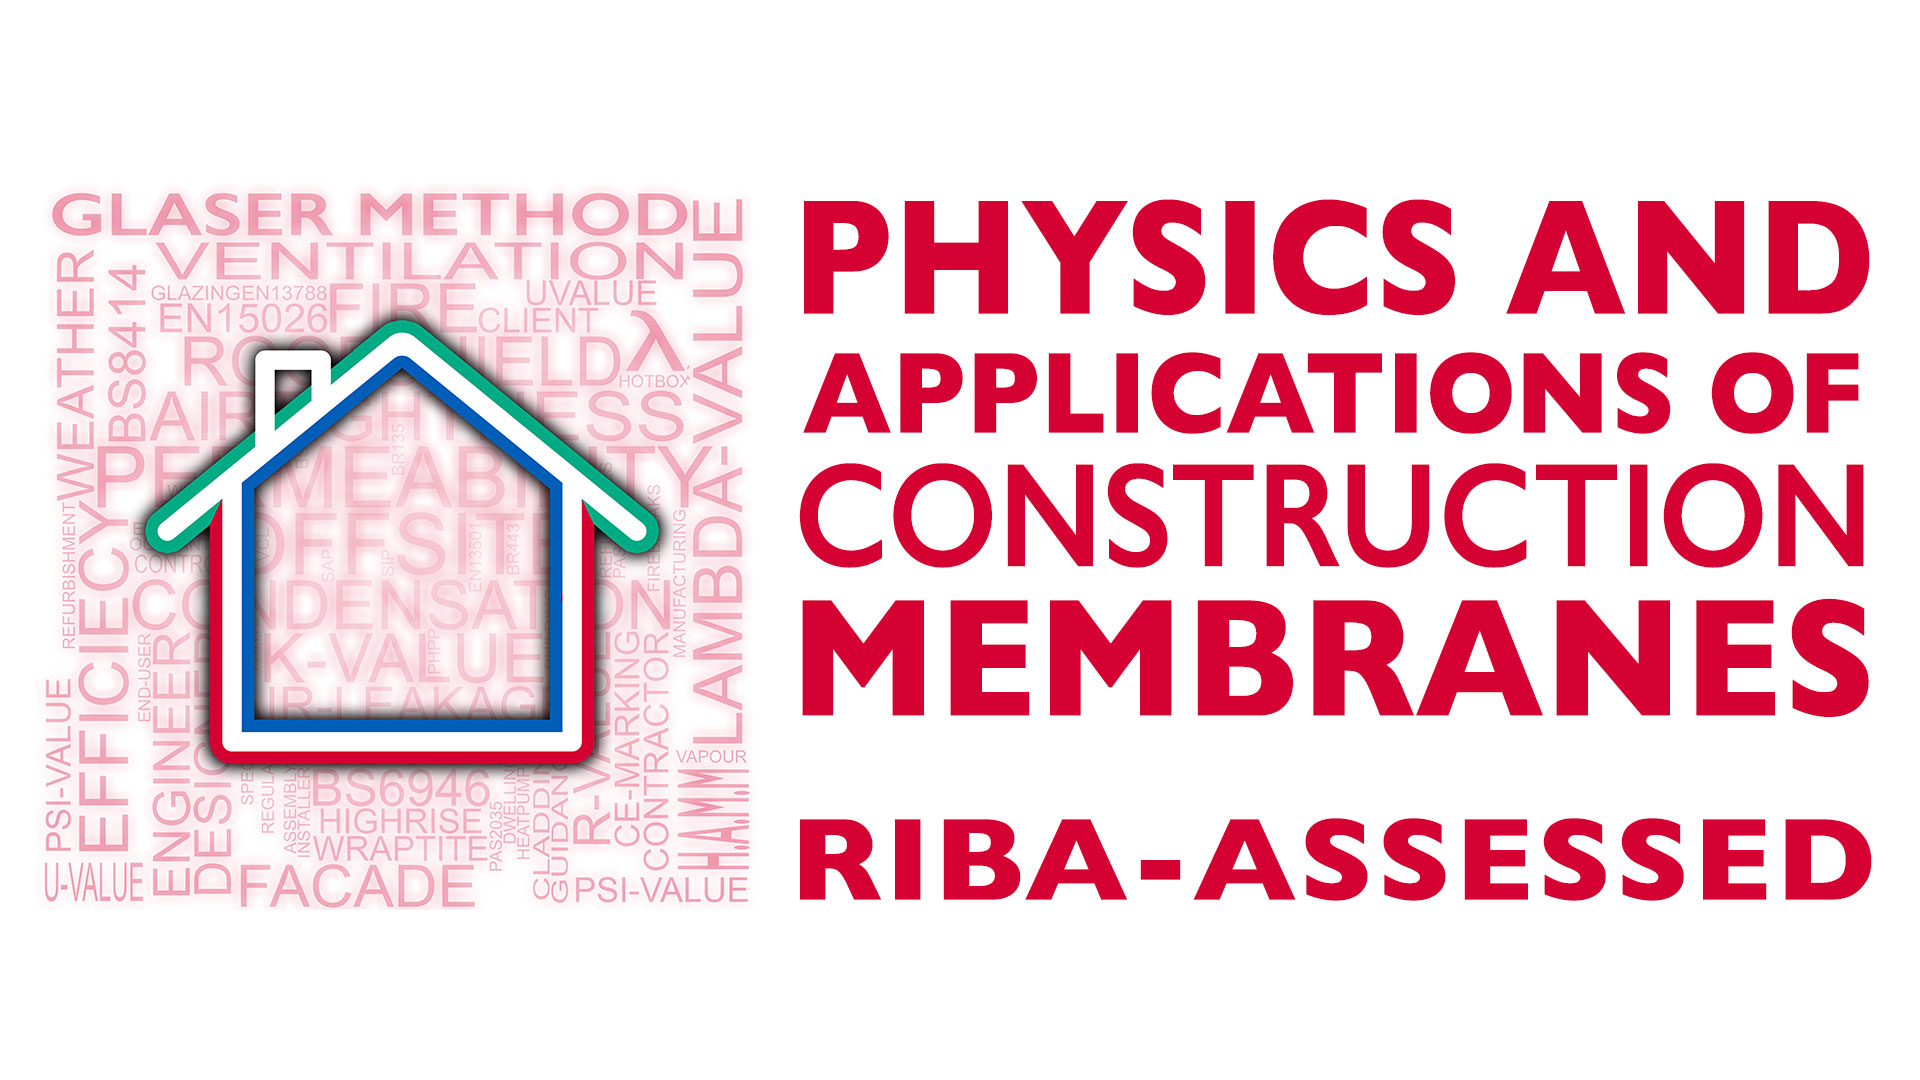 The Physics and Applications of Construction Membranes